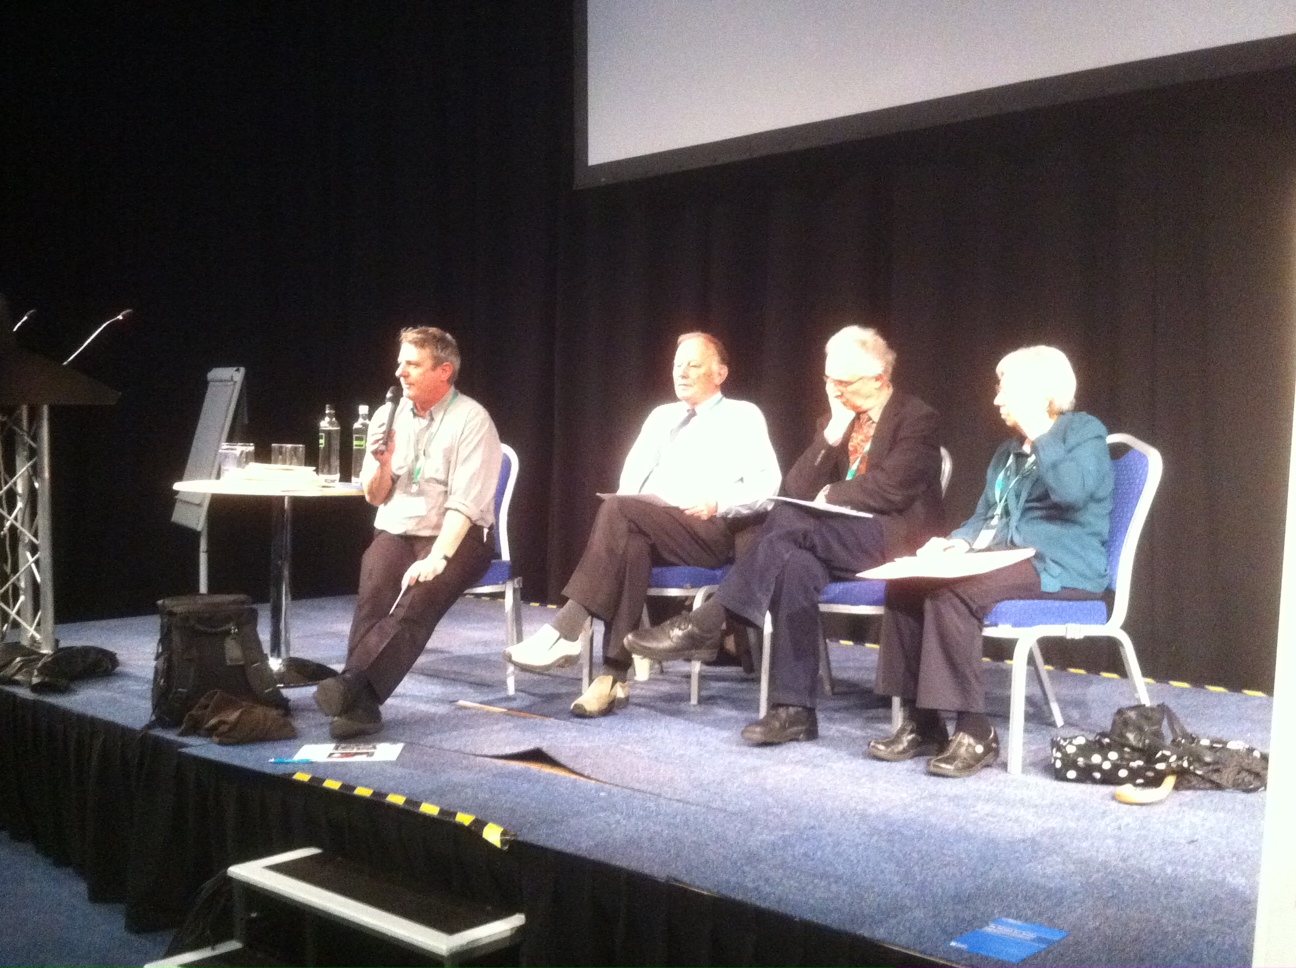 Richard Smith, John Swales, Andy Gillett, Meriel Bloor at panel discussion on history of eap and of baleap, BALEAP 2013, University of Nottingham, 20.4.13